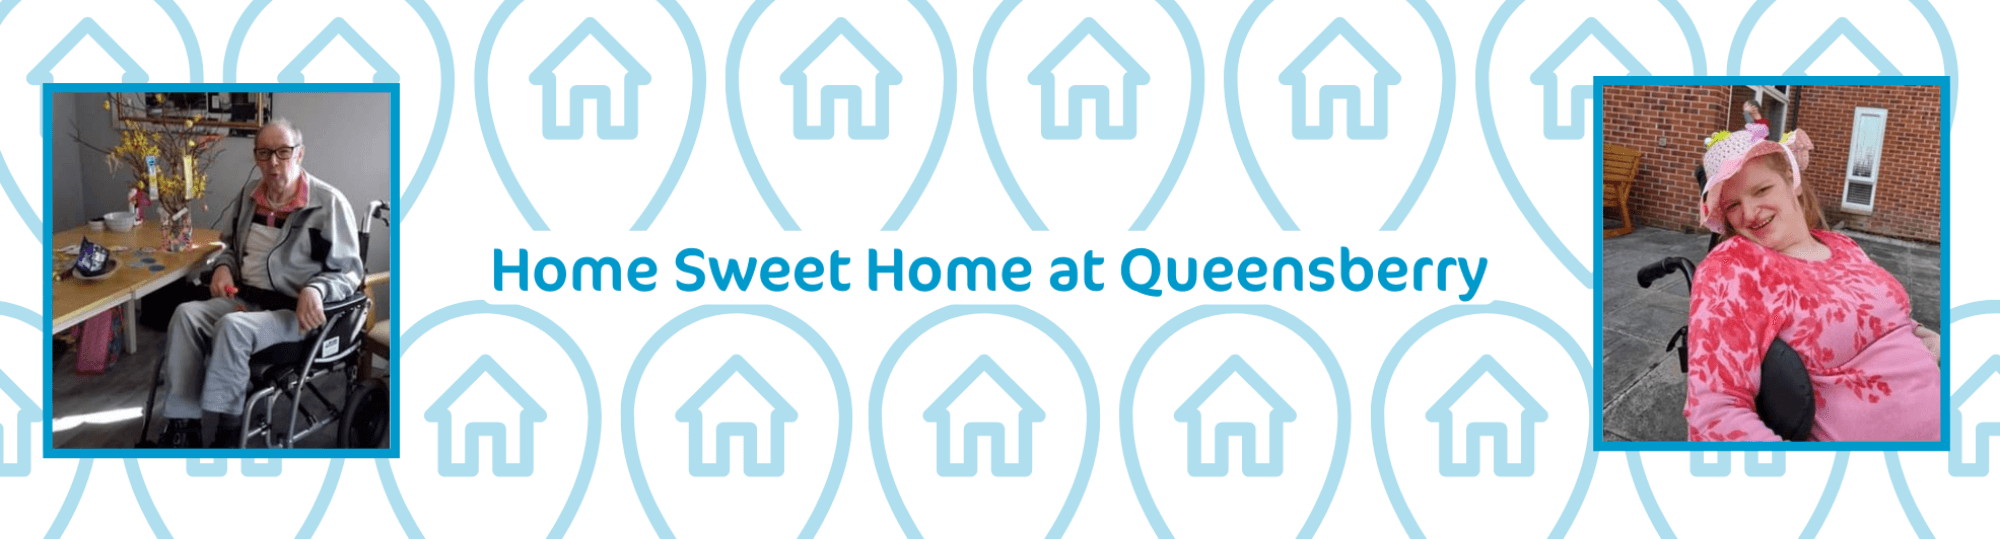 Home Sweet Home: Queensberry